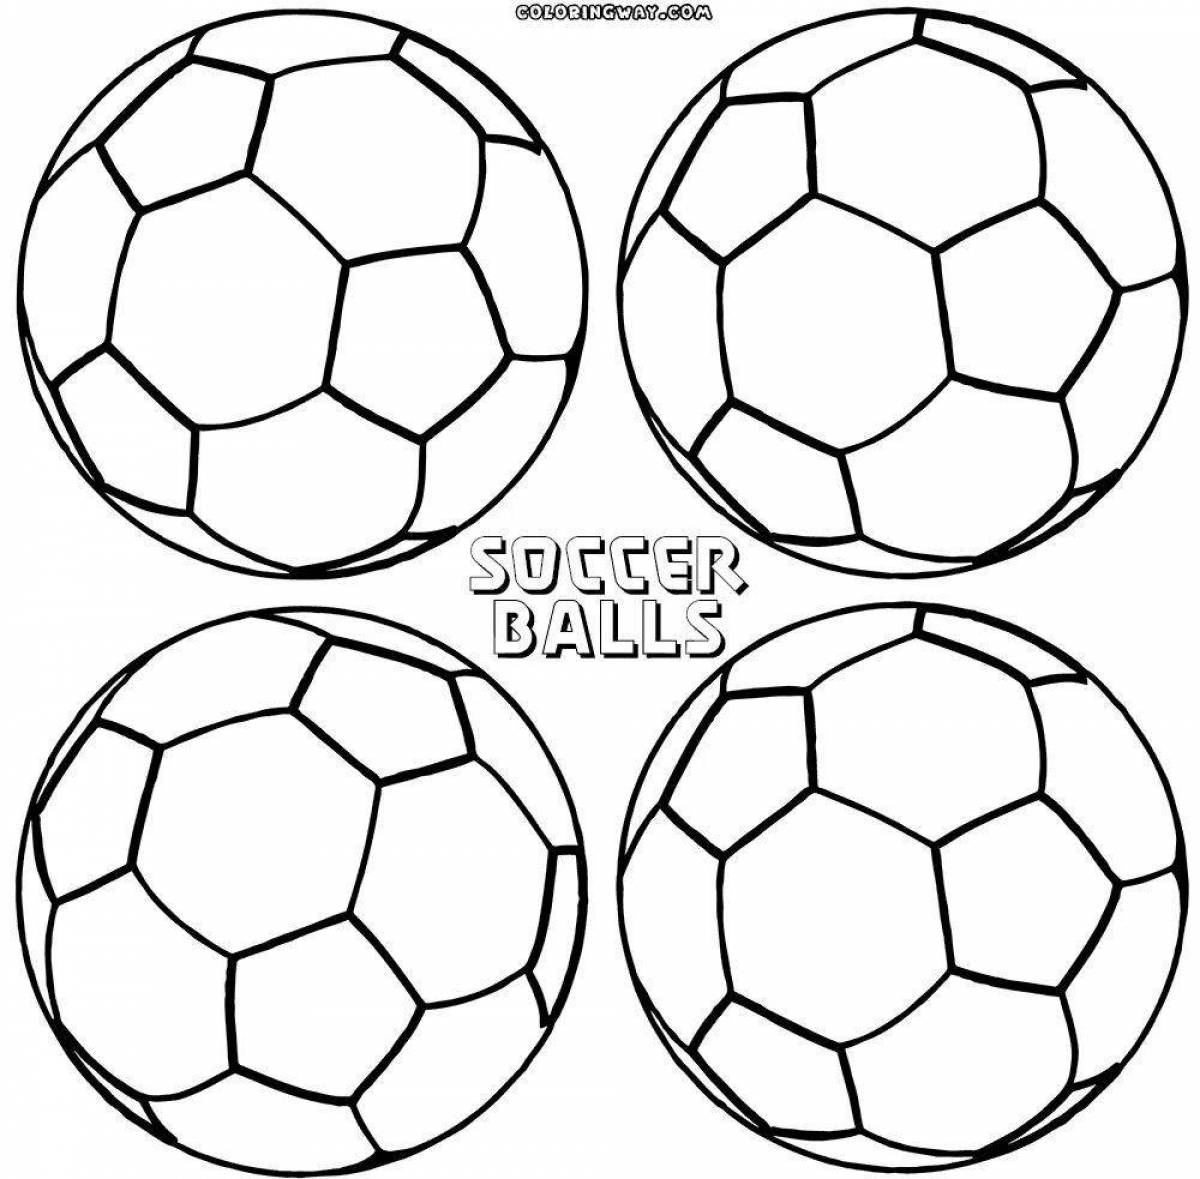 Creative ball coloring book for 4-5 year olds